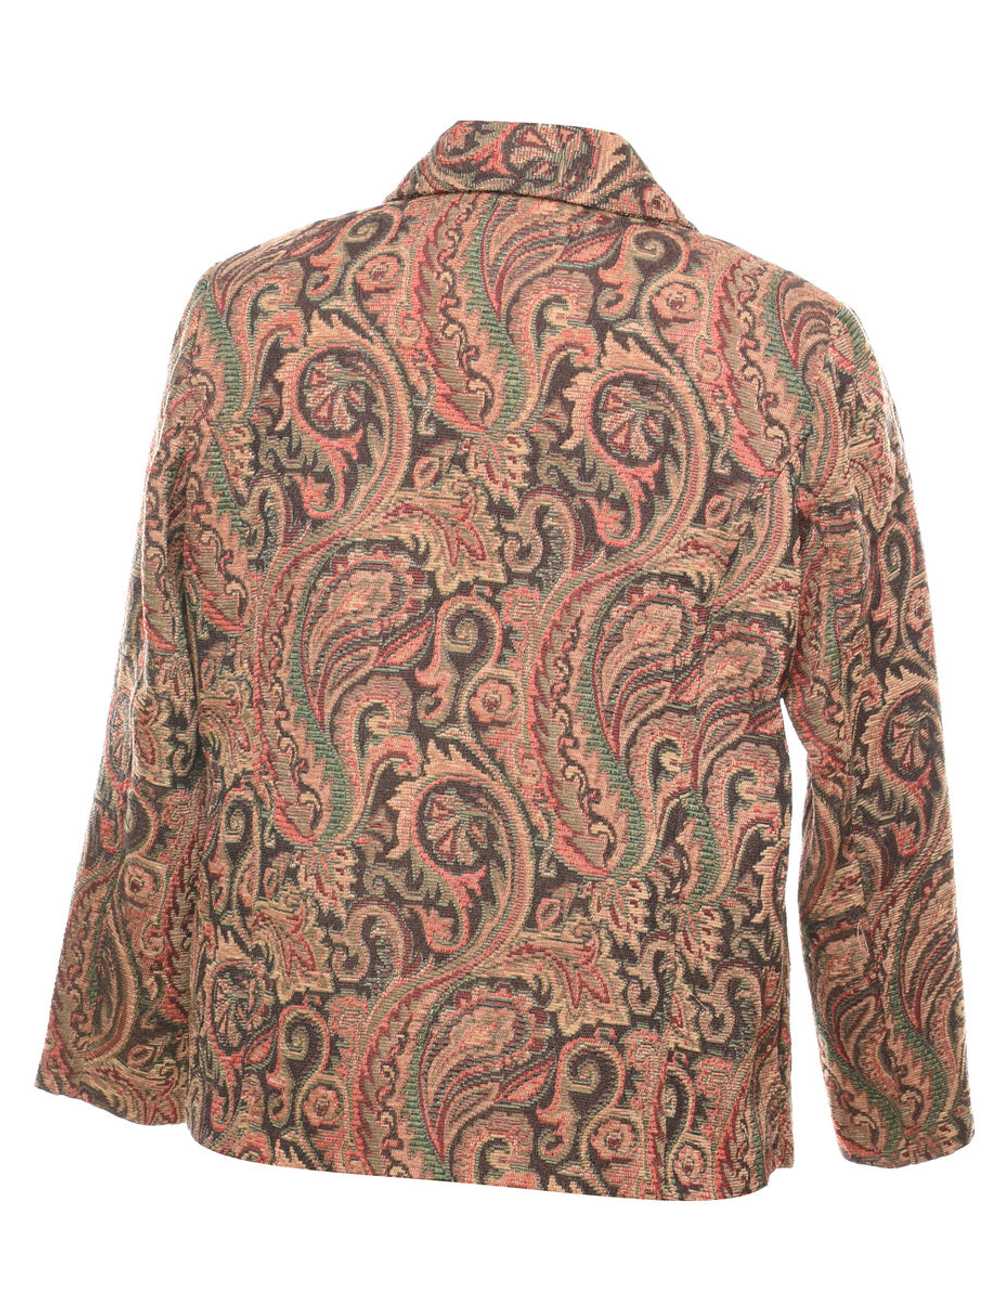 Paisley Pattern Multi-Colour Tapestry Jacket - M - image 2